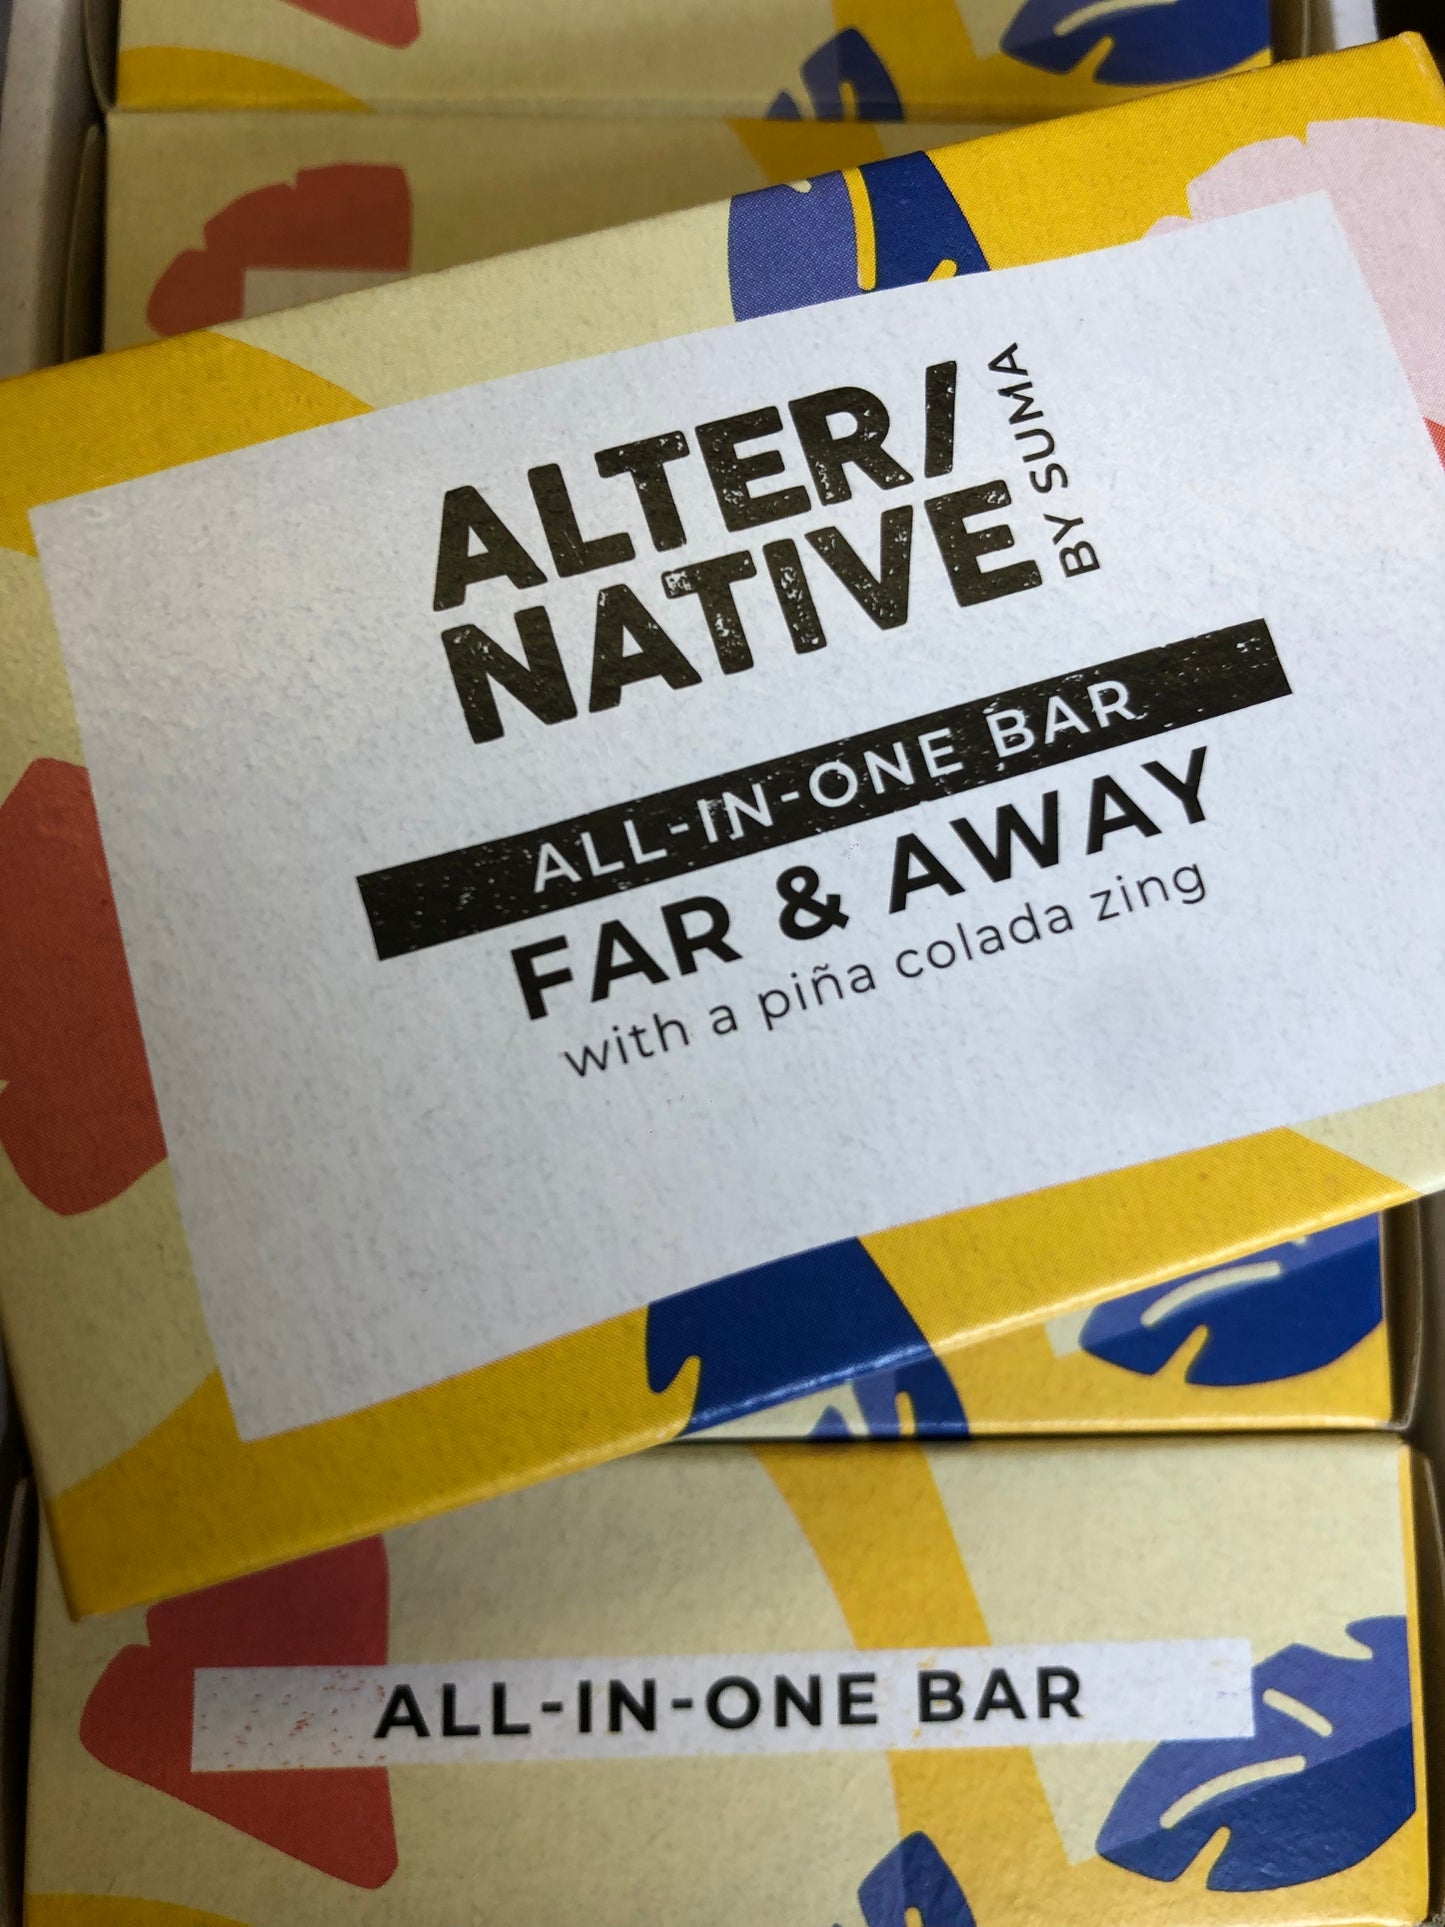 Alter/Native All In One Bar